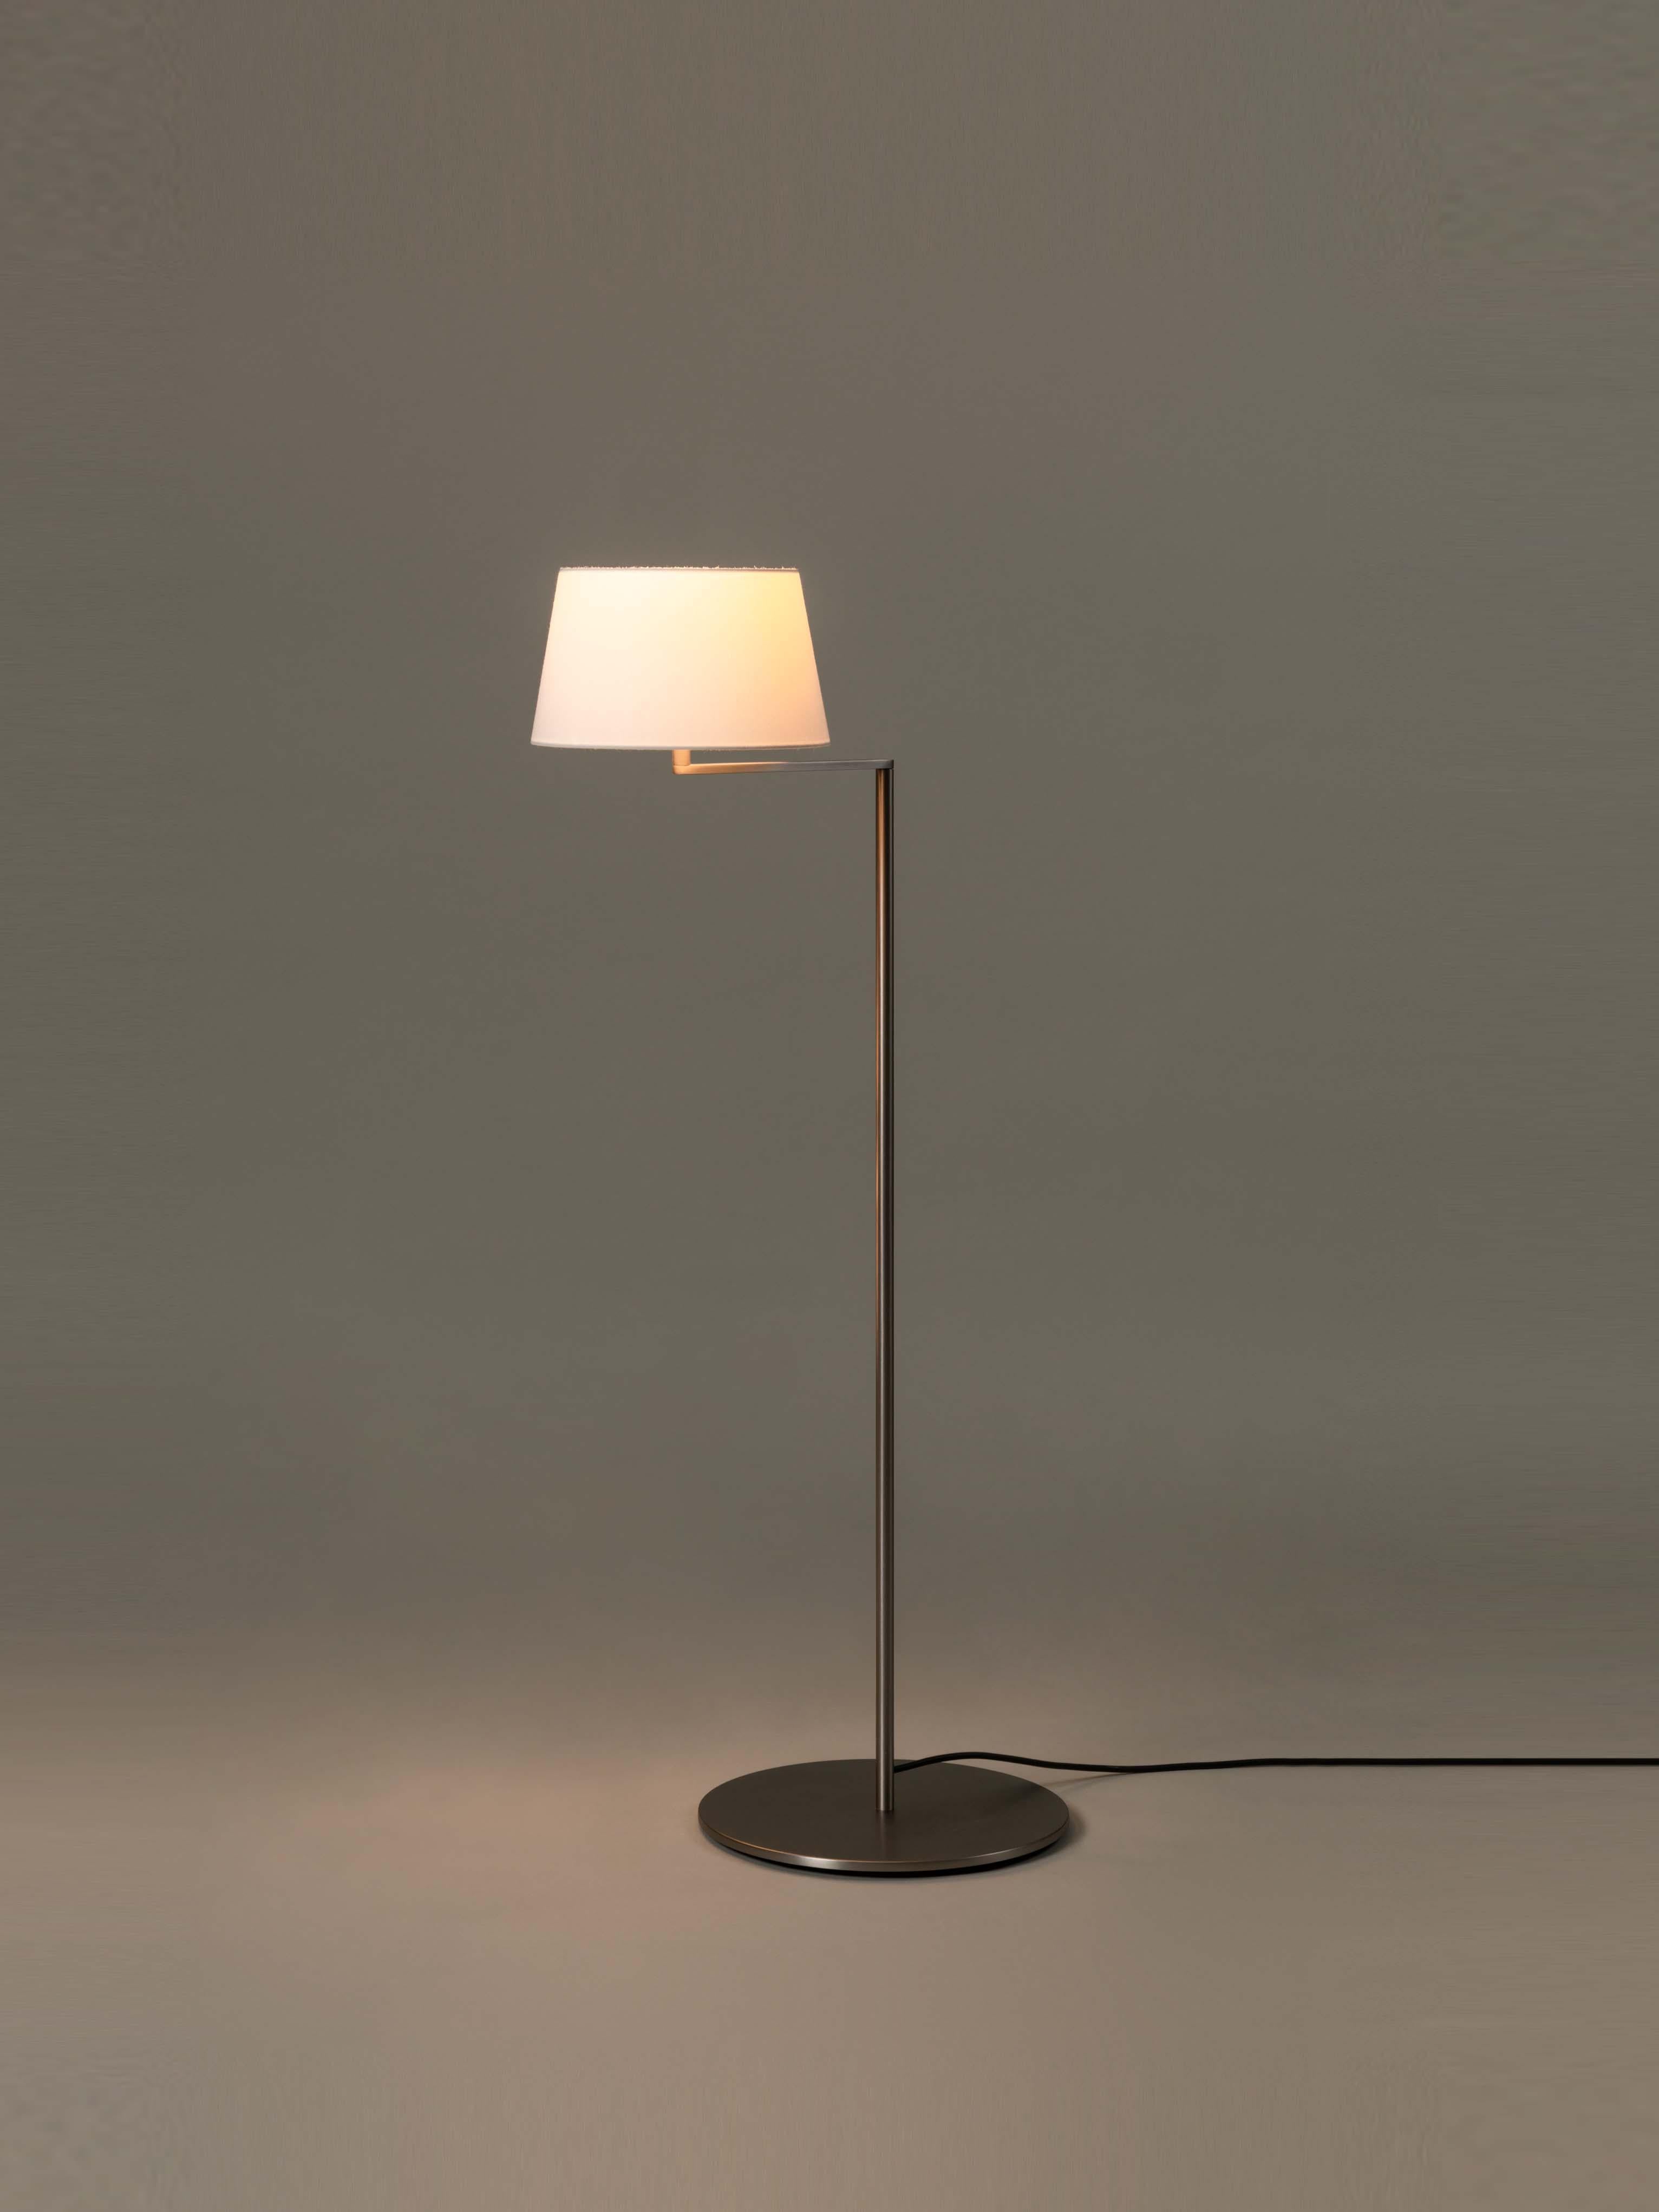 Americana floor lamp by Miguel Milá
Dimensions: W 33 x D 52 x H 112 cm
Materials: Satin nickel, linen.

The Americana series is built around a satin nickel rotating arm holding an elegant white linen shade. The arm gently swivels the light